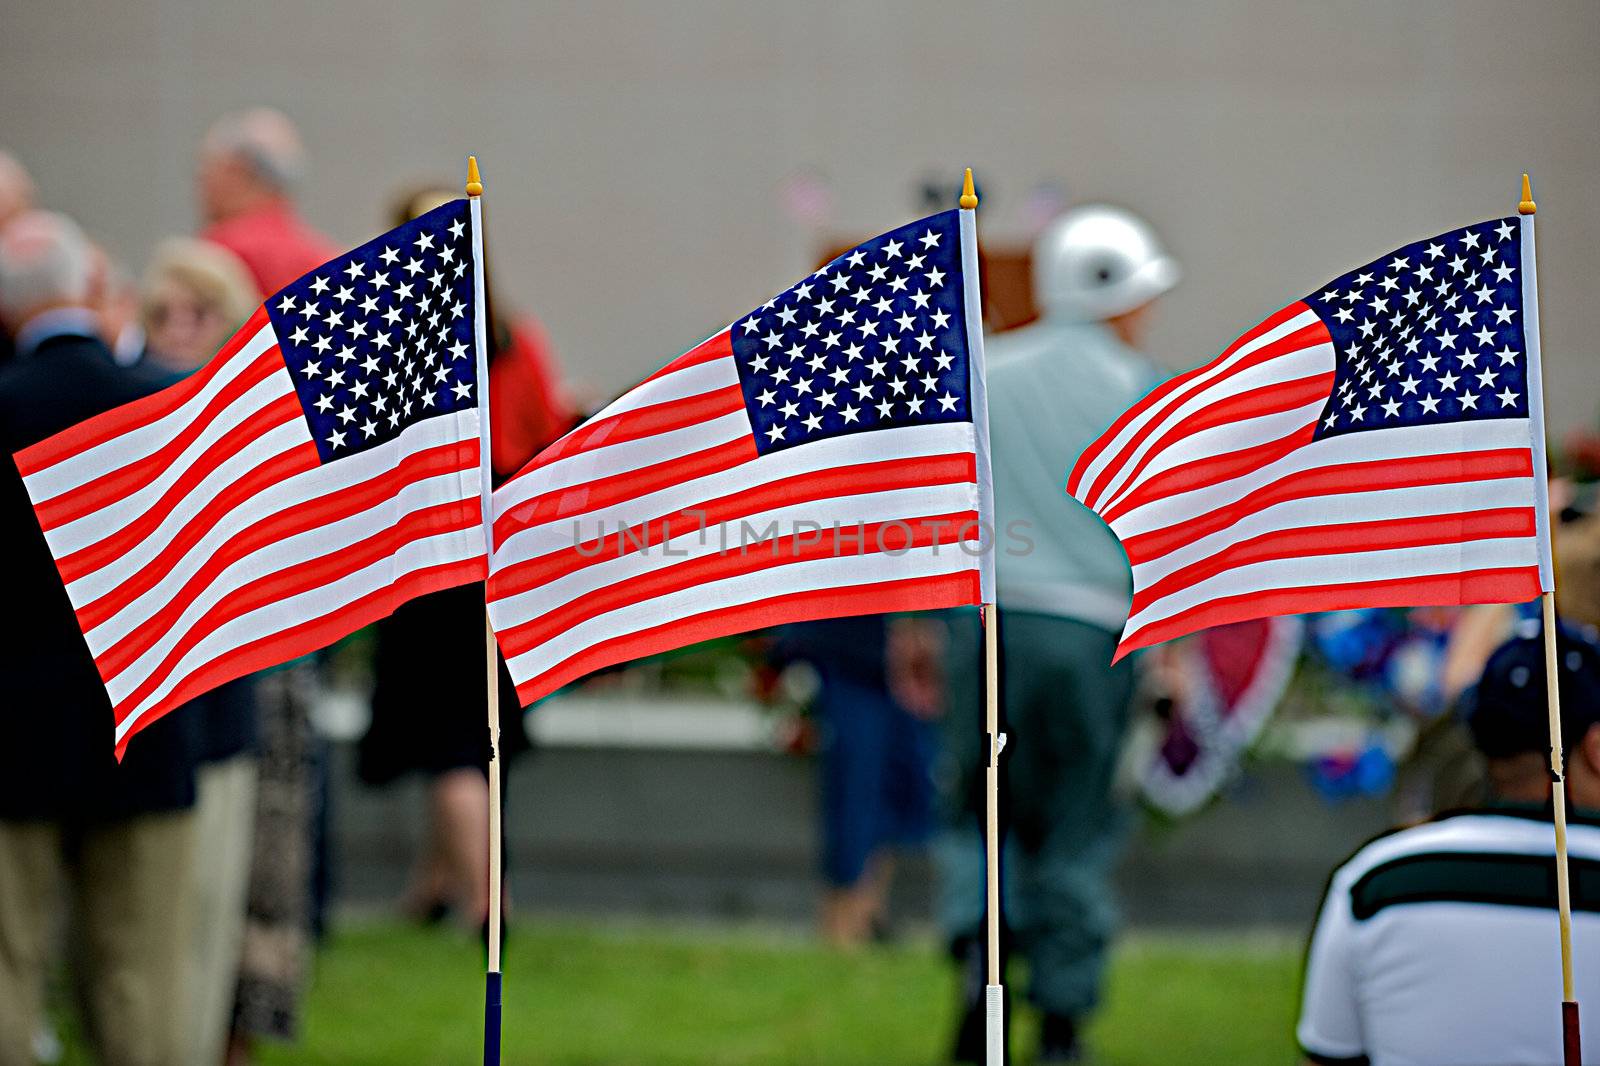 Three United States flags waving in the breeze during a Memorial Day event.